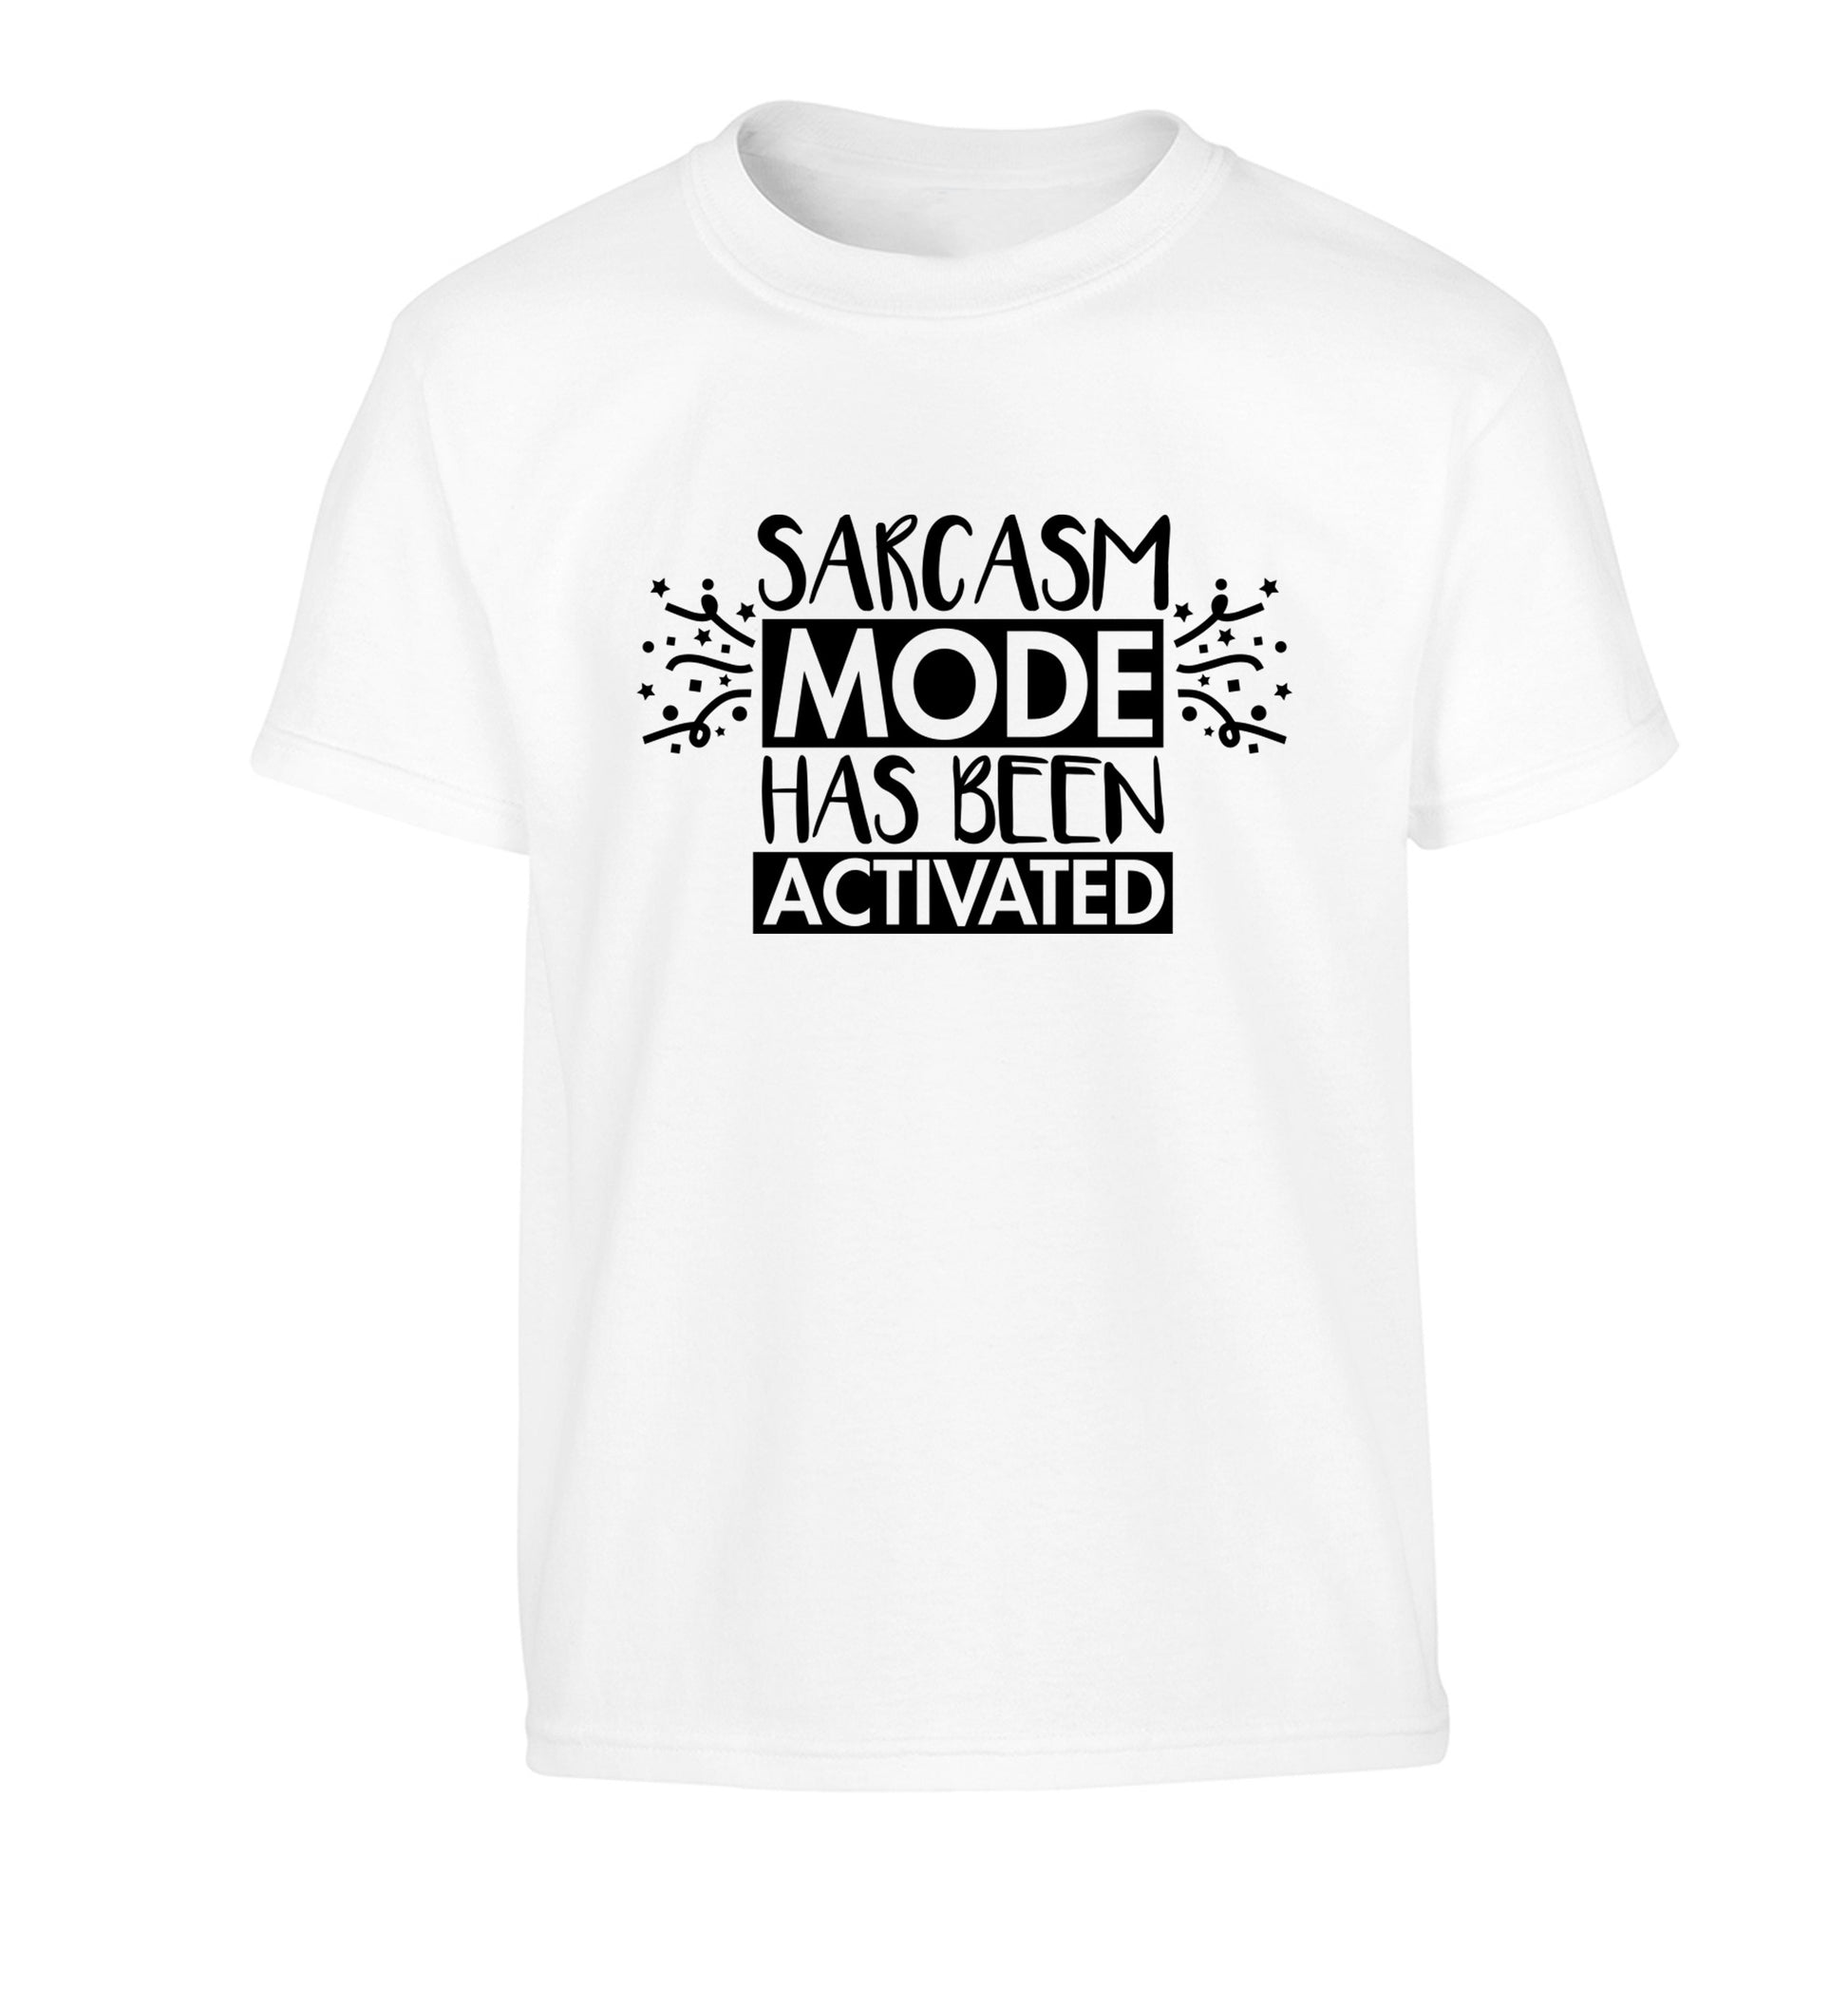 Sarcarsm mode has been activated Children's white Tshirt 12-14 Years